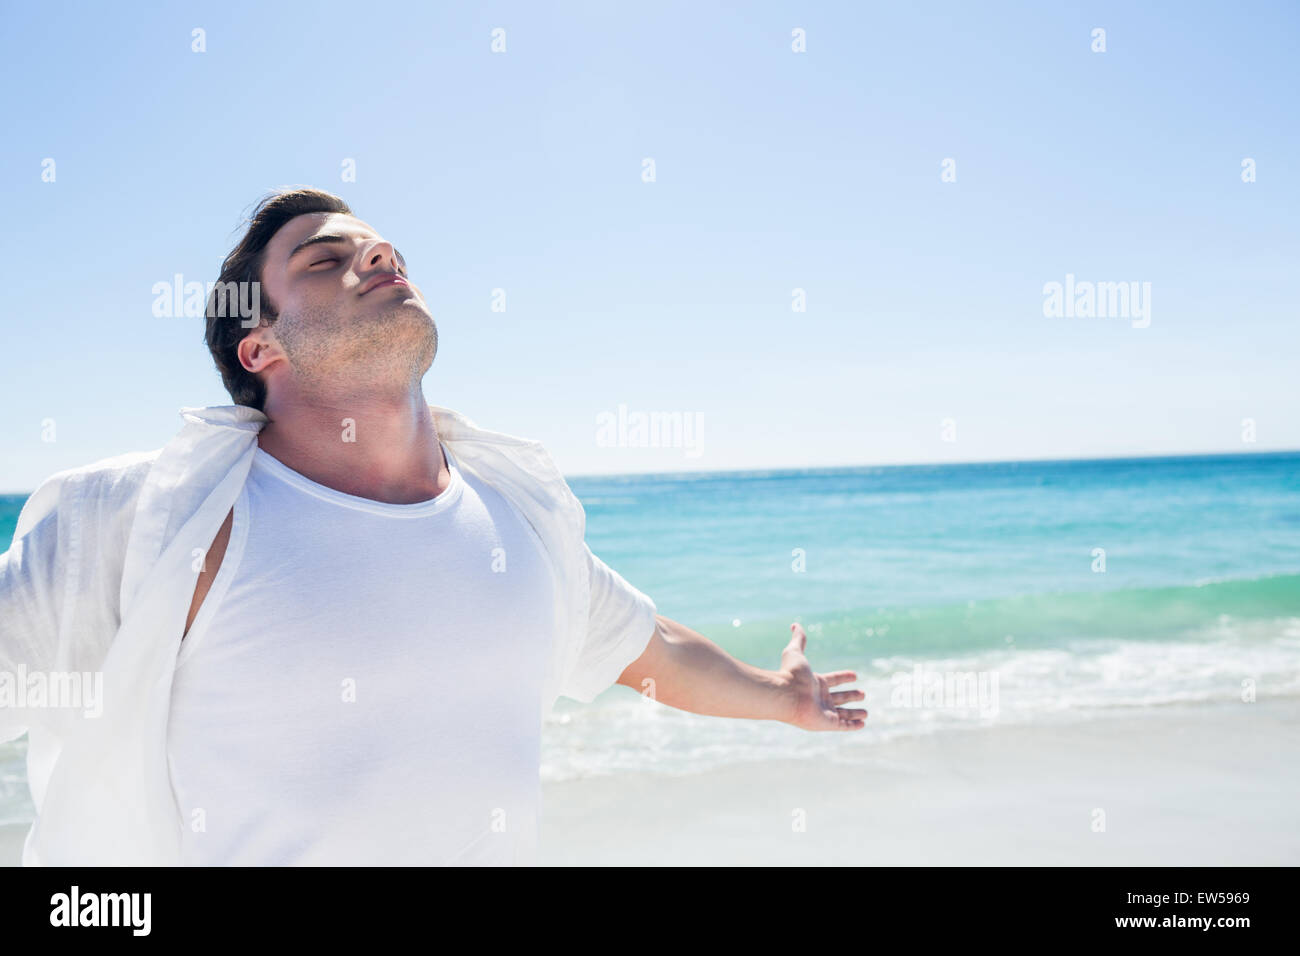 Man stretching his arms in front of the sea Stock Photo